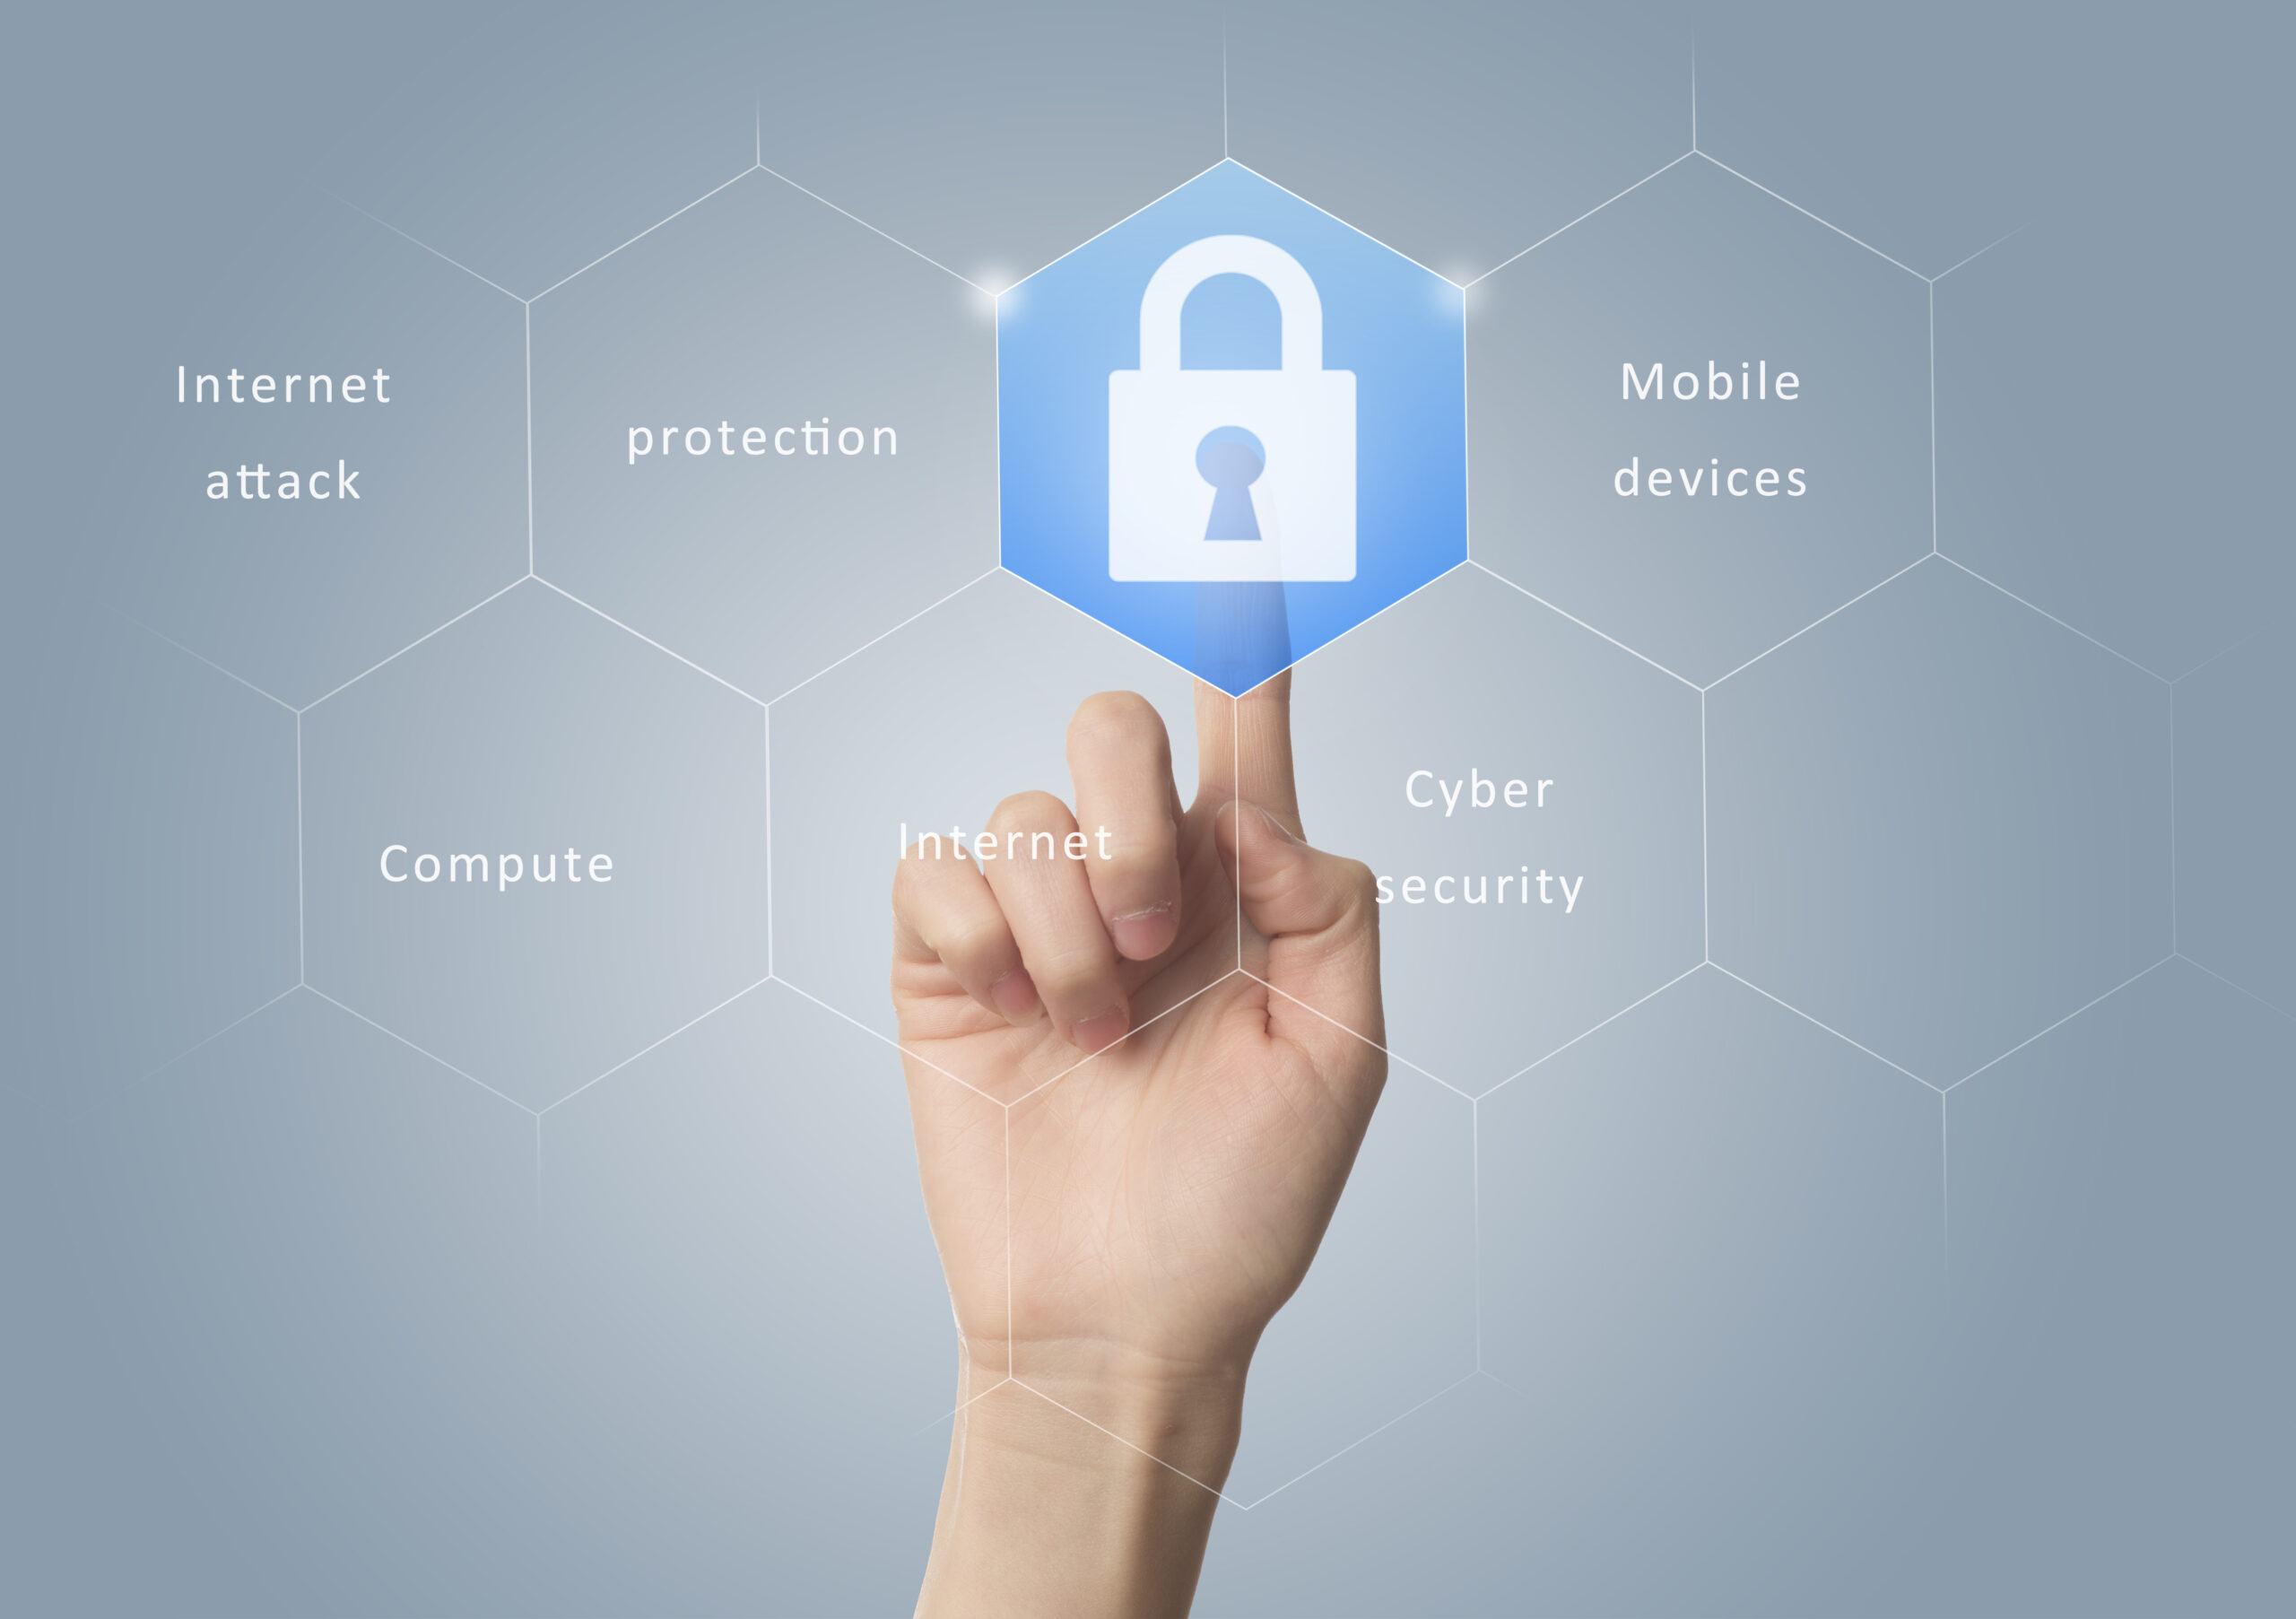 3 Reasons to Deploy an Identity and Access Management Solution